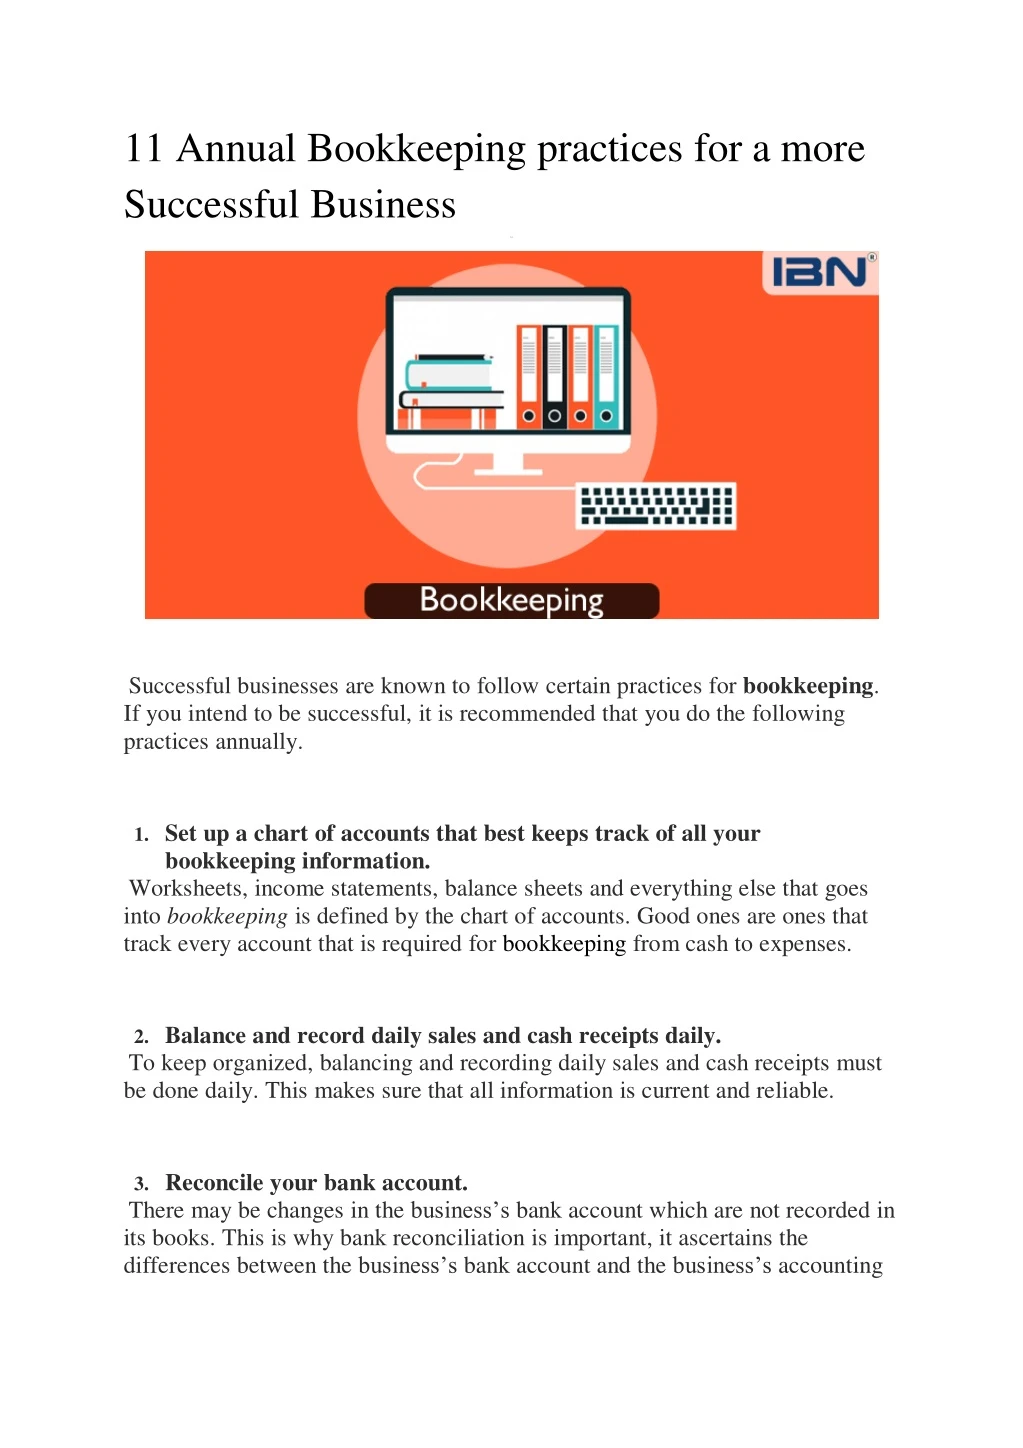 11 annual bookkeeping practices for a more